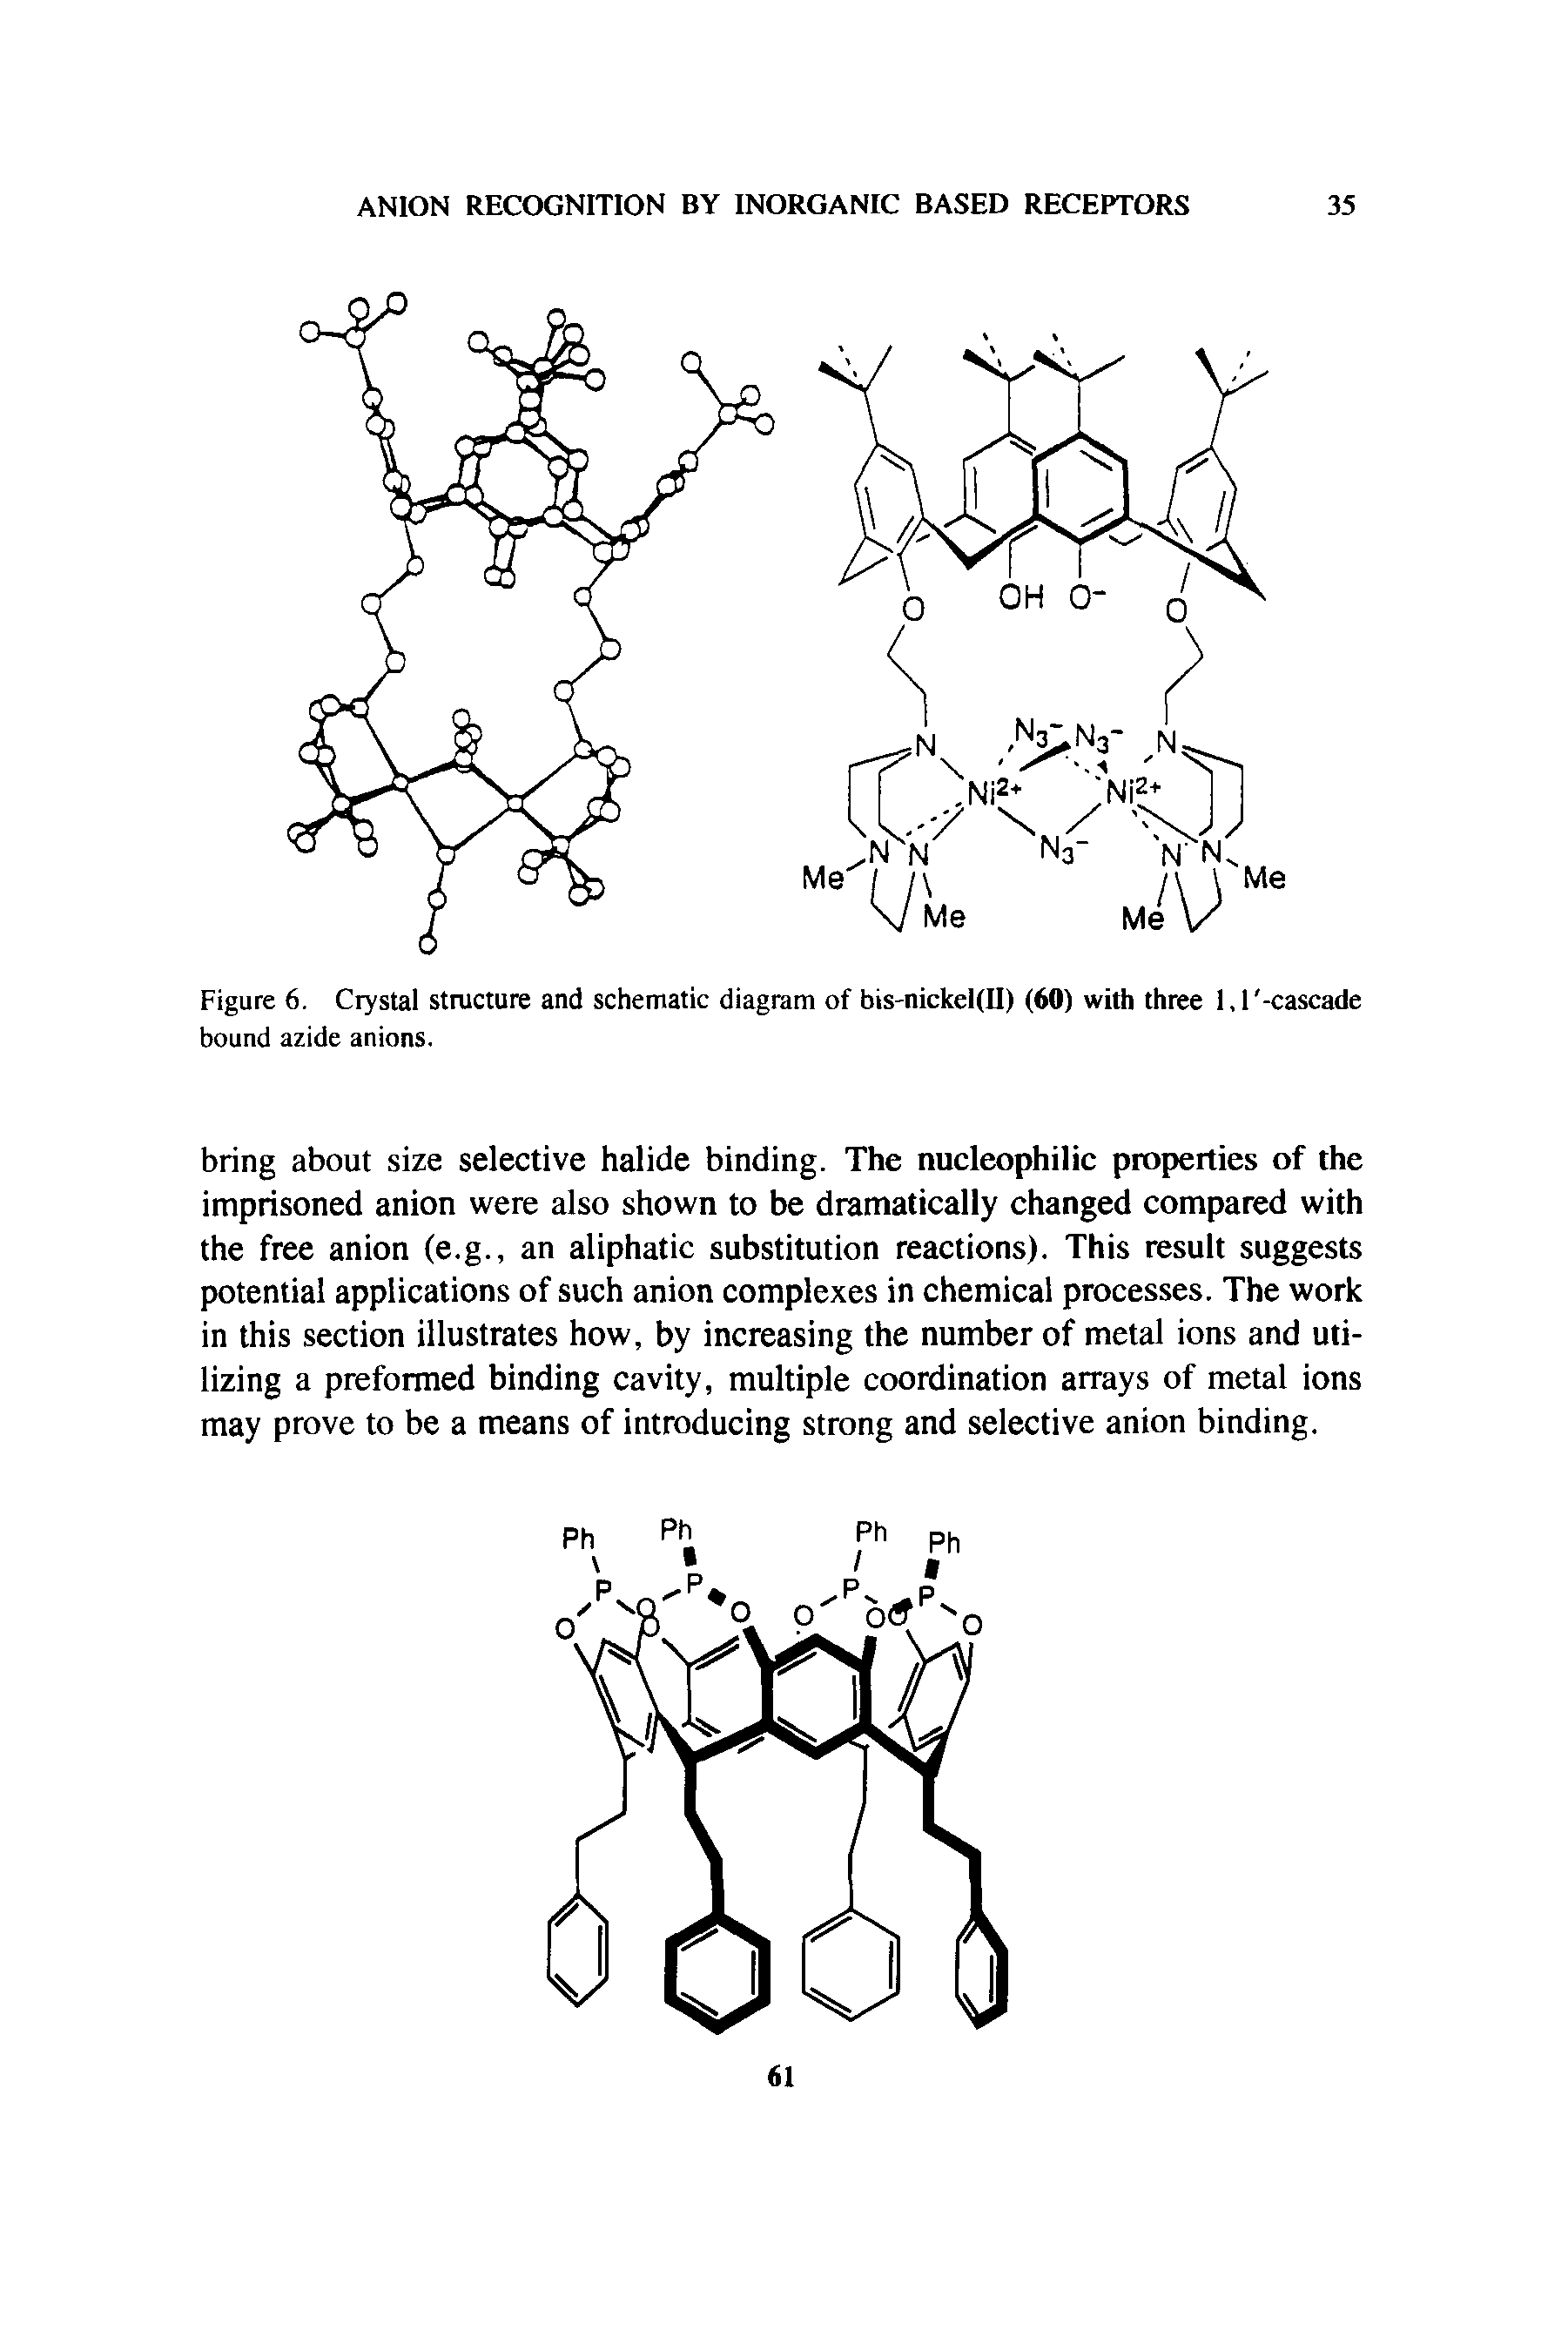 Figure 6. Crystal structure and schematic diagram of bis-nickel(II) (60) with three l,l -cascade bound azide anions.